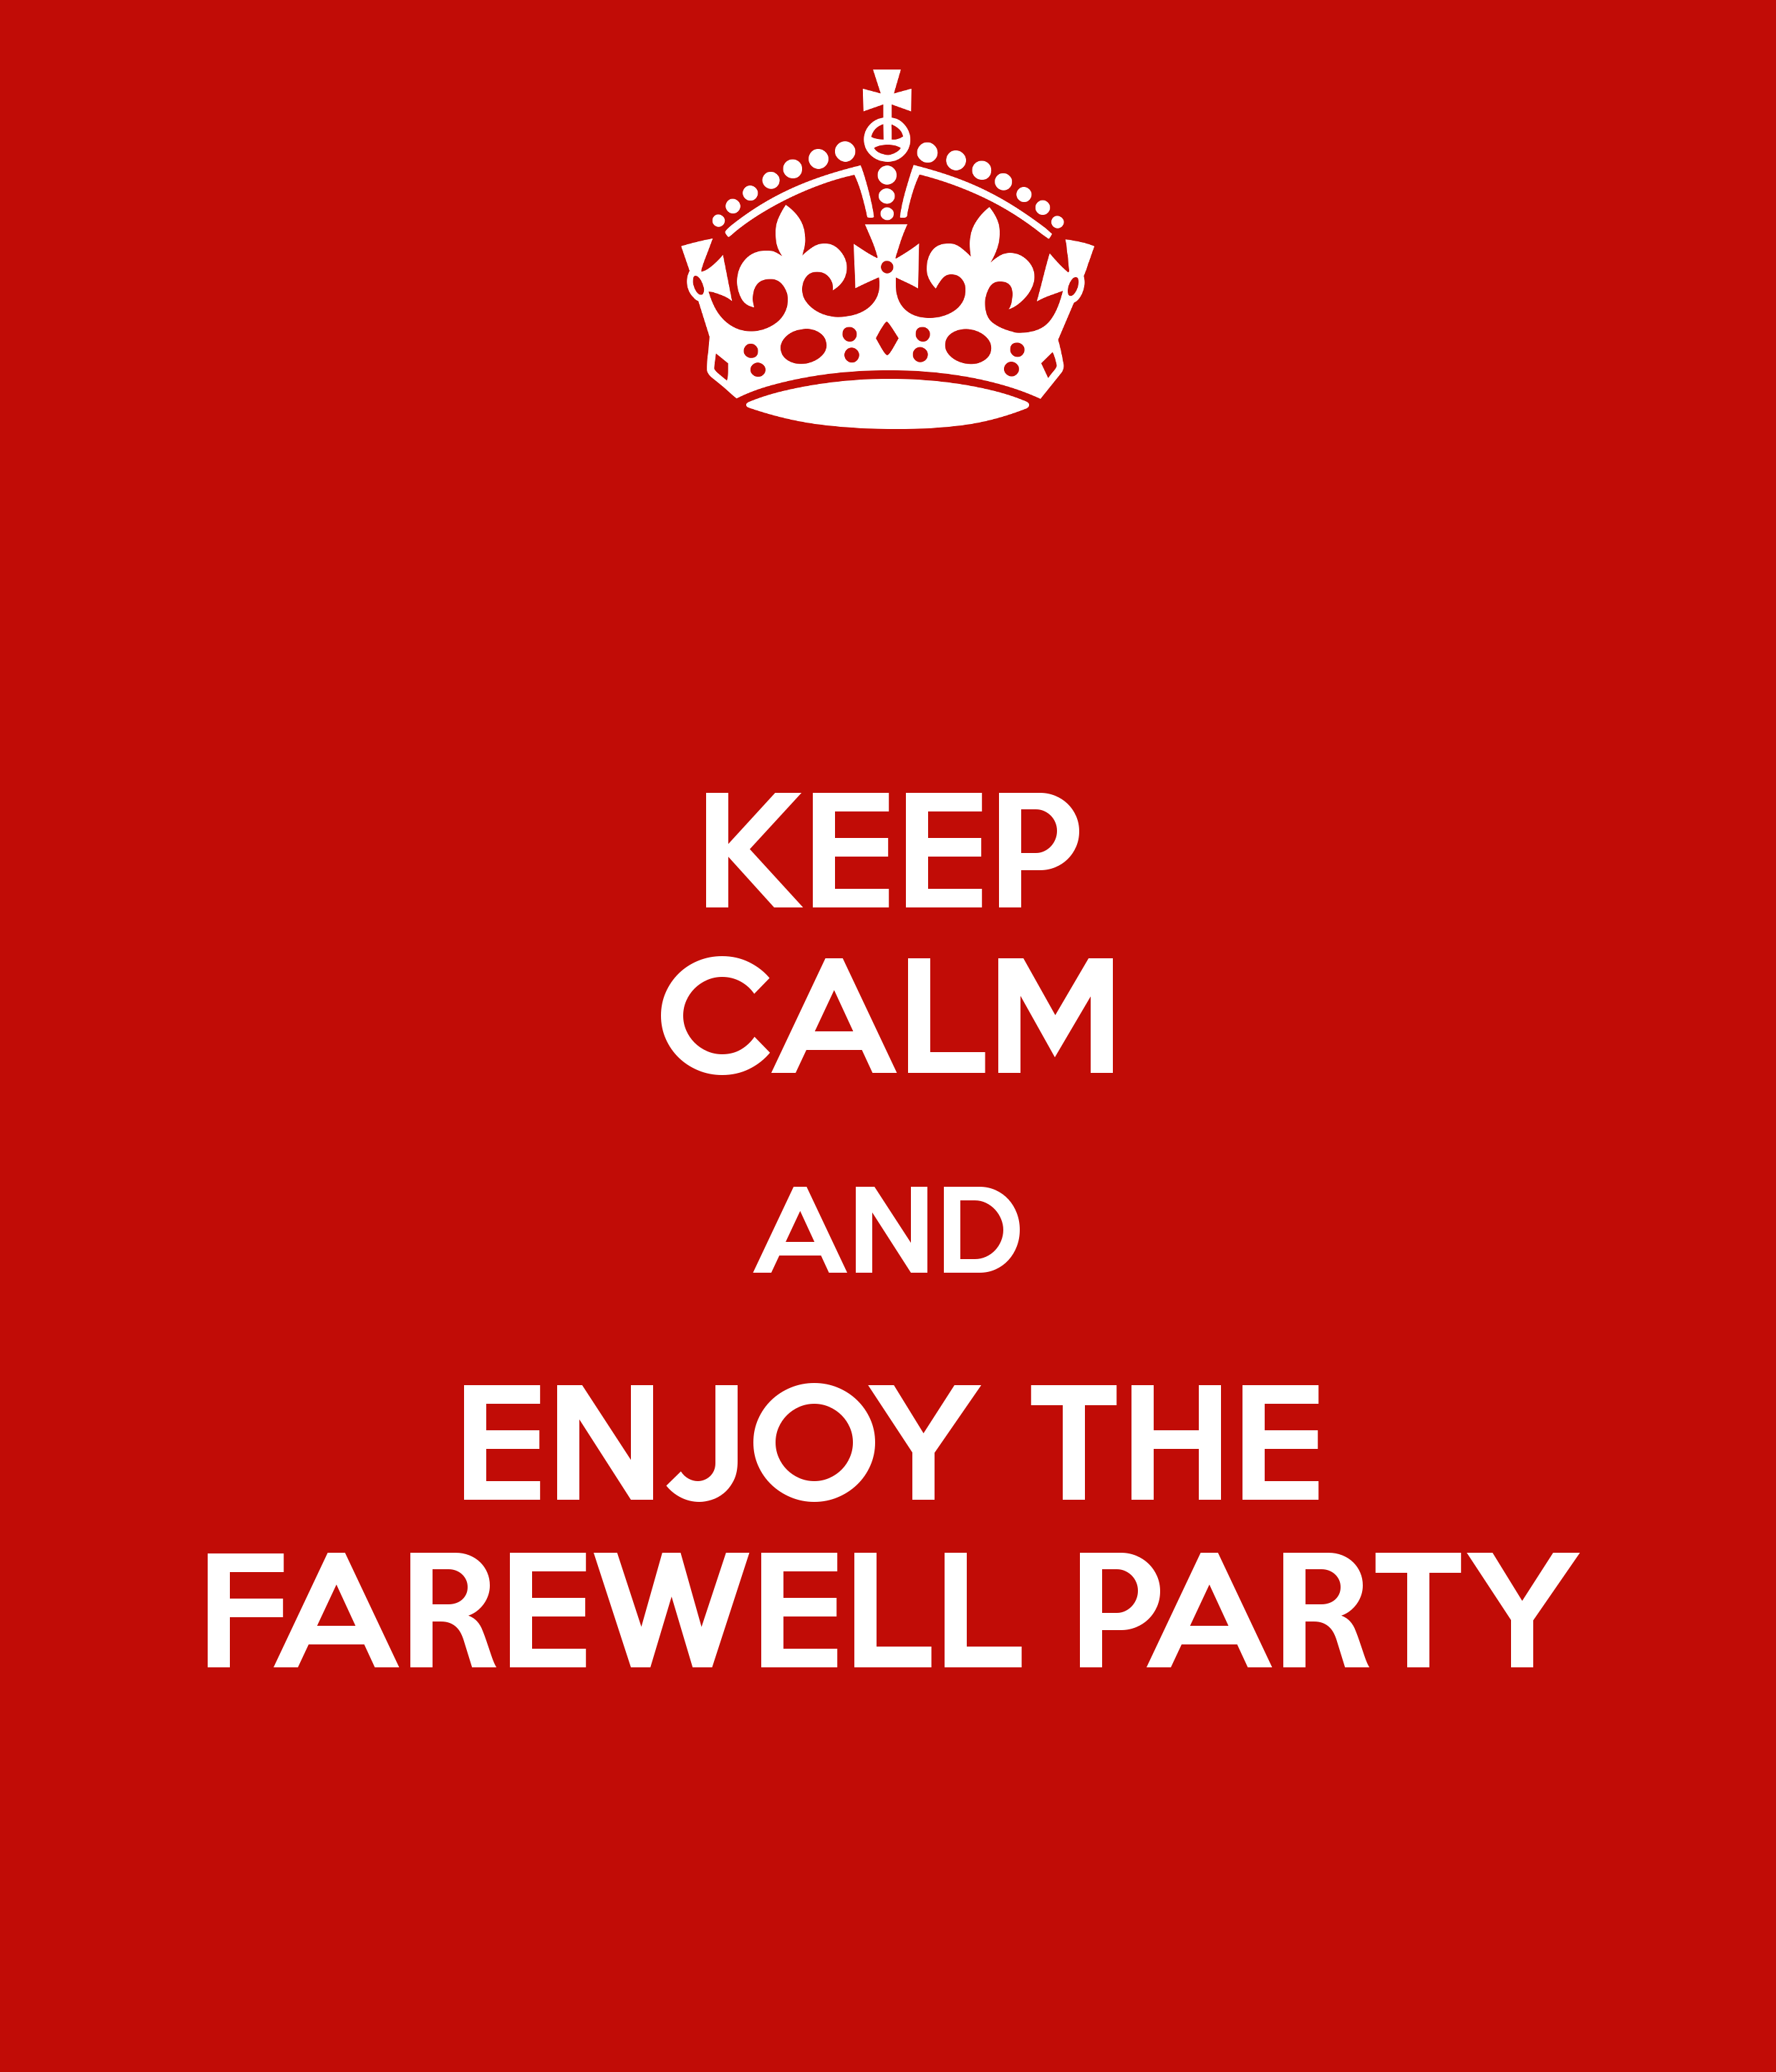 Farewell Party Clipart Going Away Party Meme